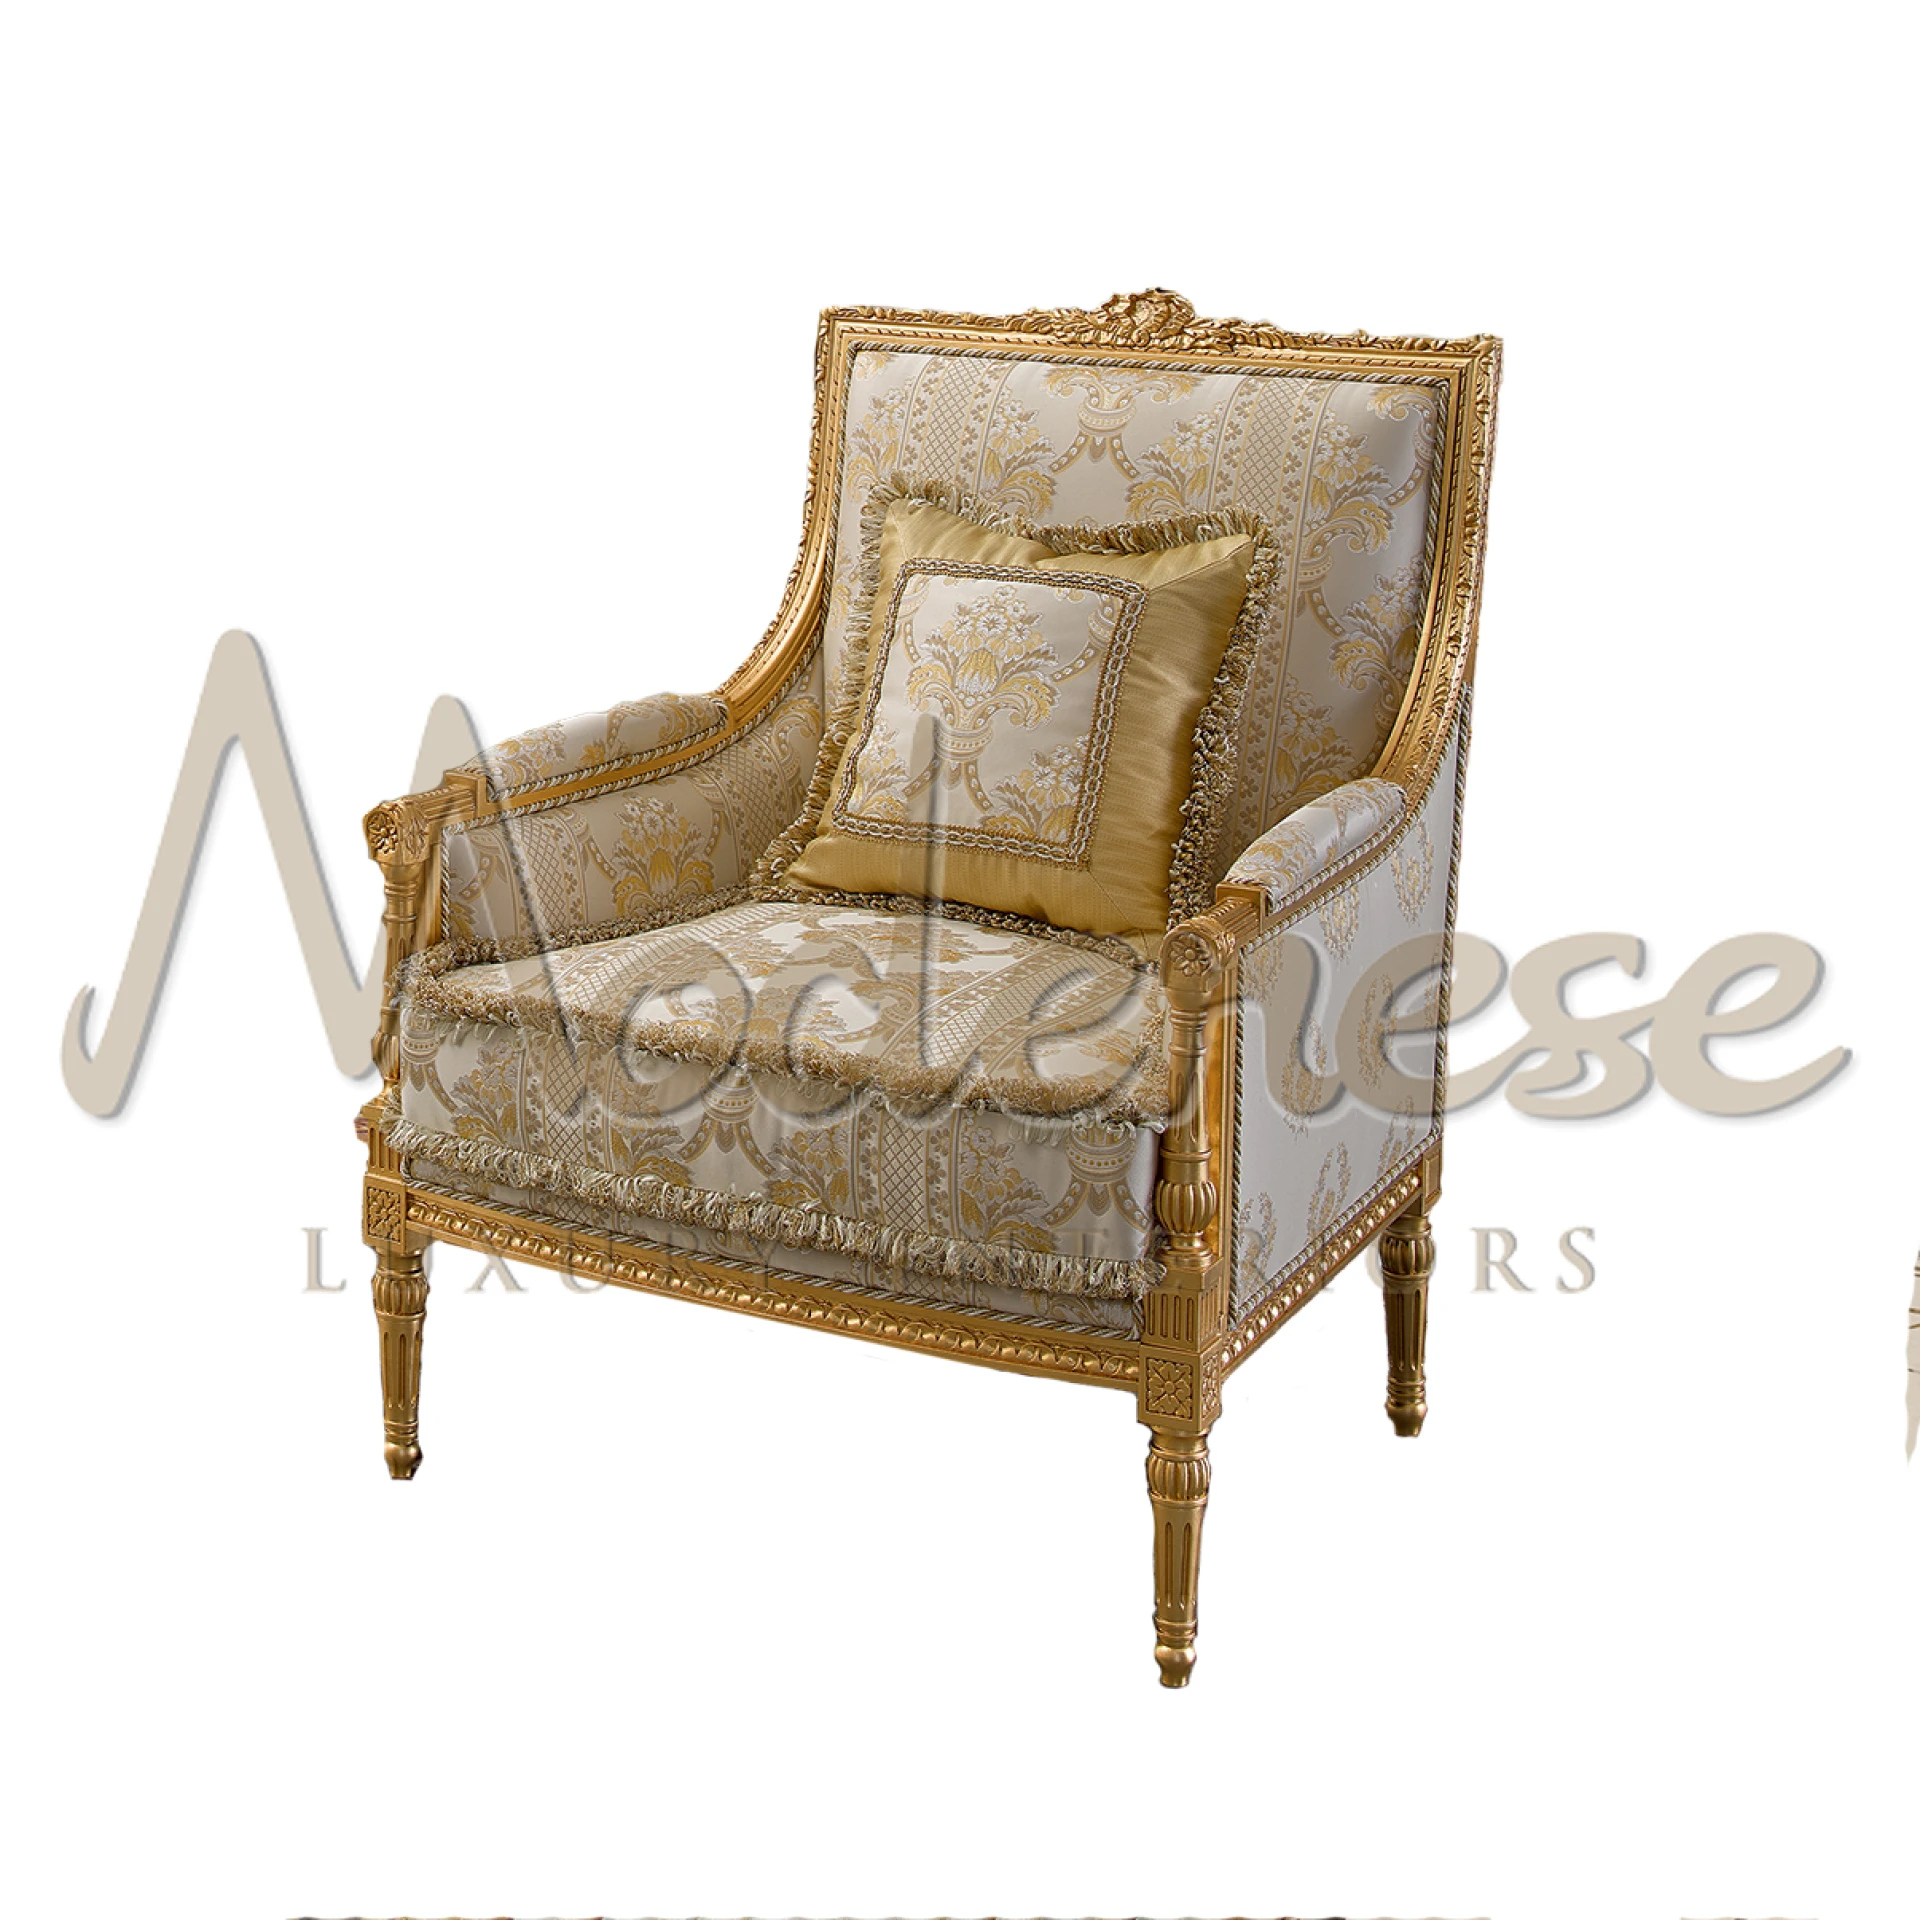 Sophisticated Empire Armchair with classical inspiration and gold leaf structure finishing, perfect for luxury interior design.
